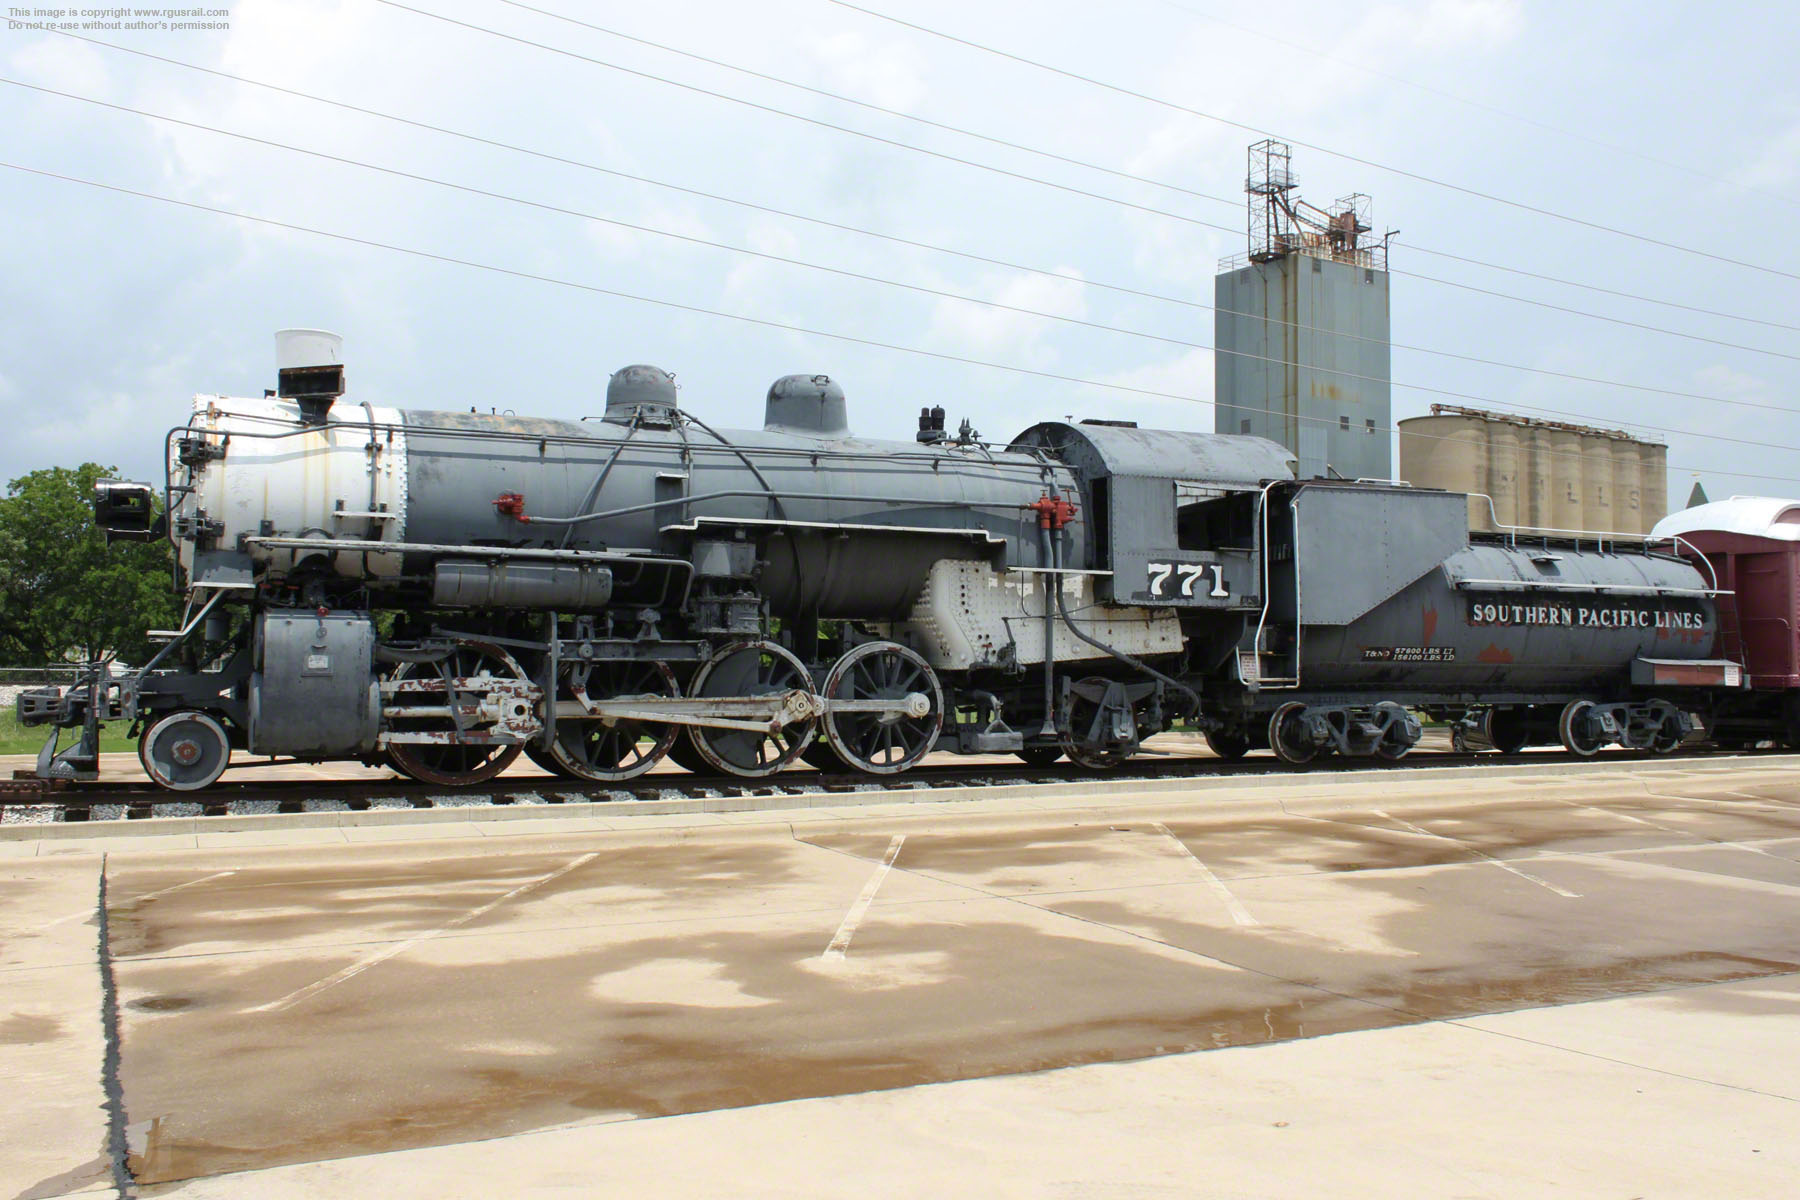 Southern Pacific 2479 Steam Locomotive